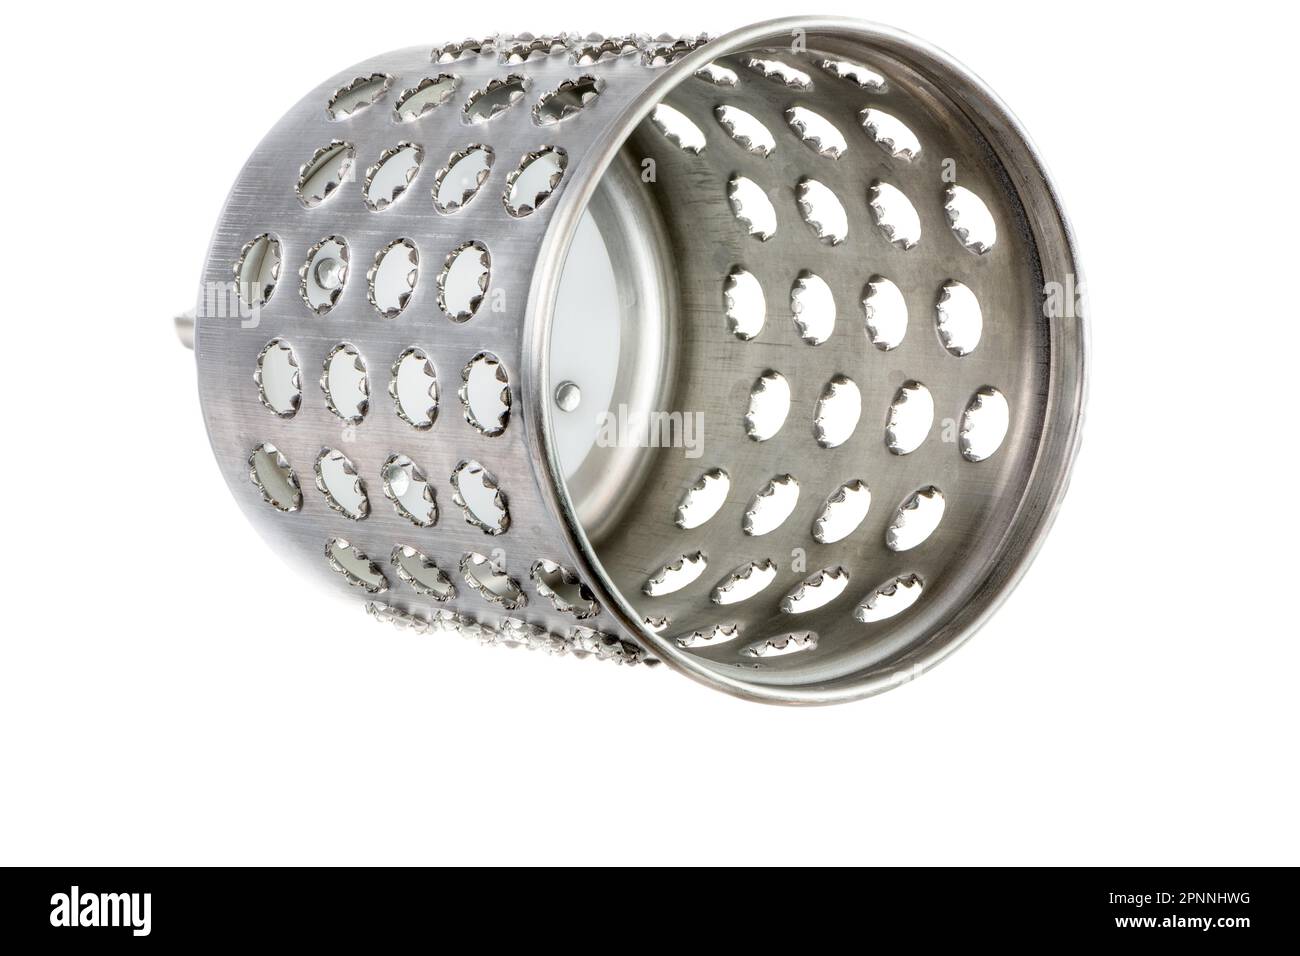 https://c8.alamy.com/comp/2PNNHWG/isolated-cylindric-drum-grater-rotary-cheese-grater-2PNNHWG.jpg